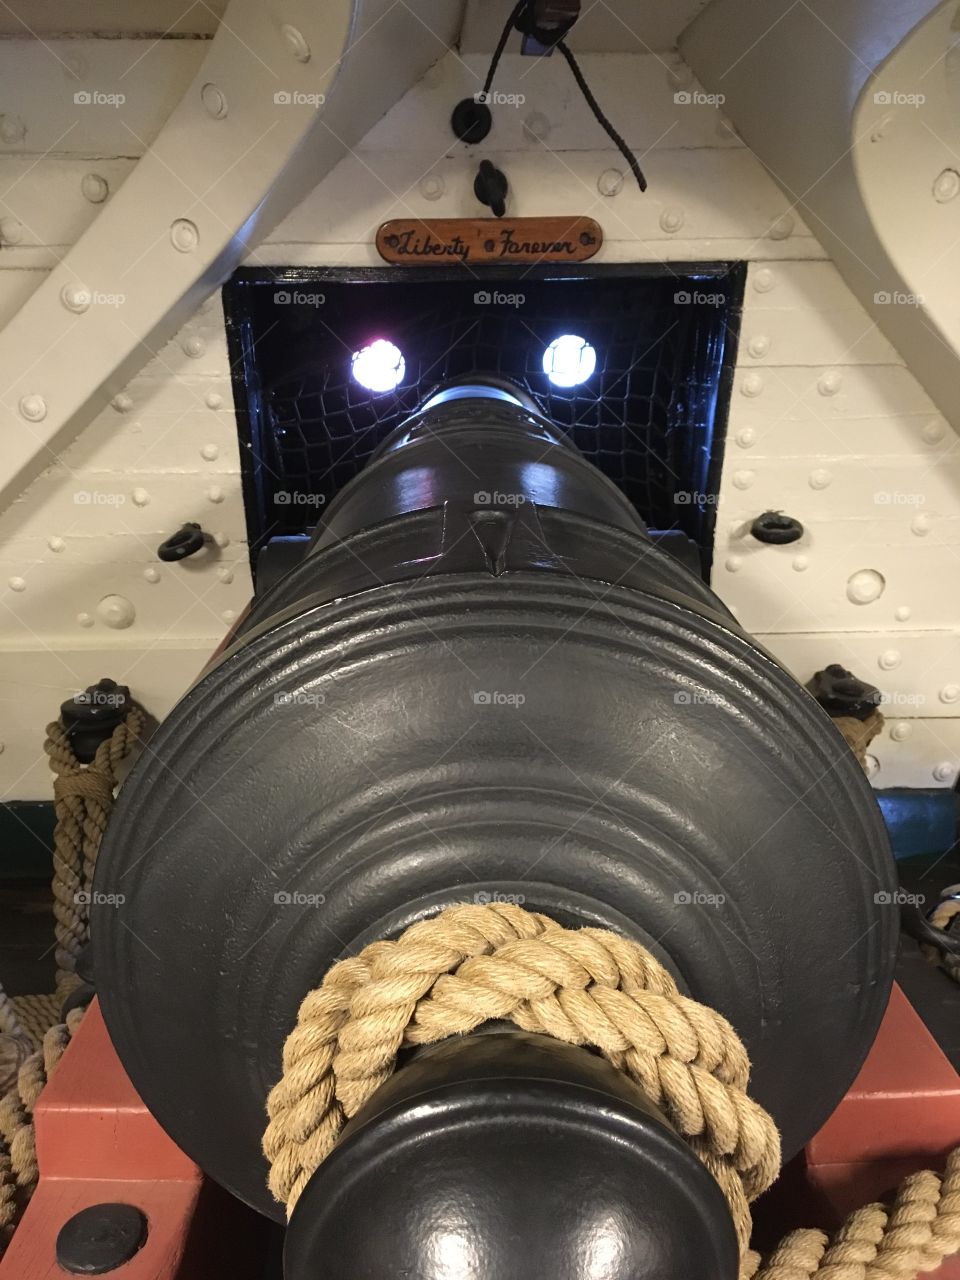 A cannon aboard the historic USS Constitution at Charlestown Naval Base in Charlestown, Massachusetts.